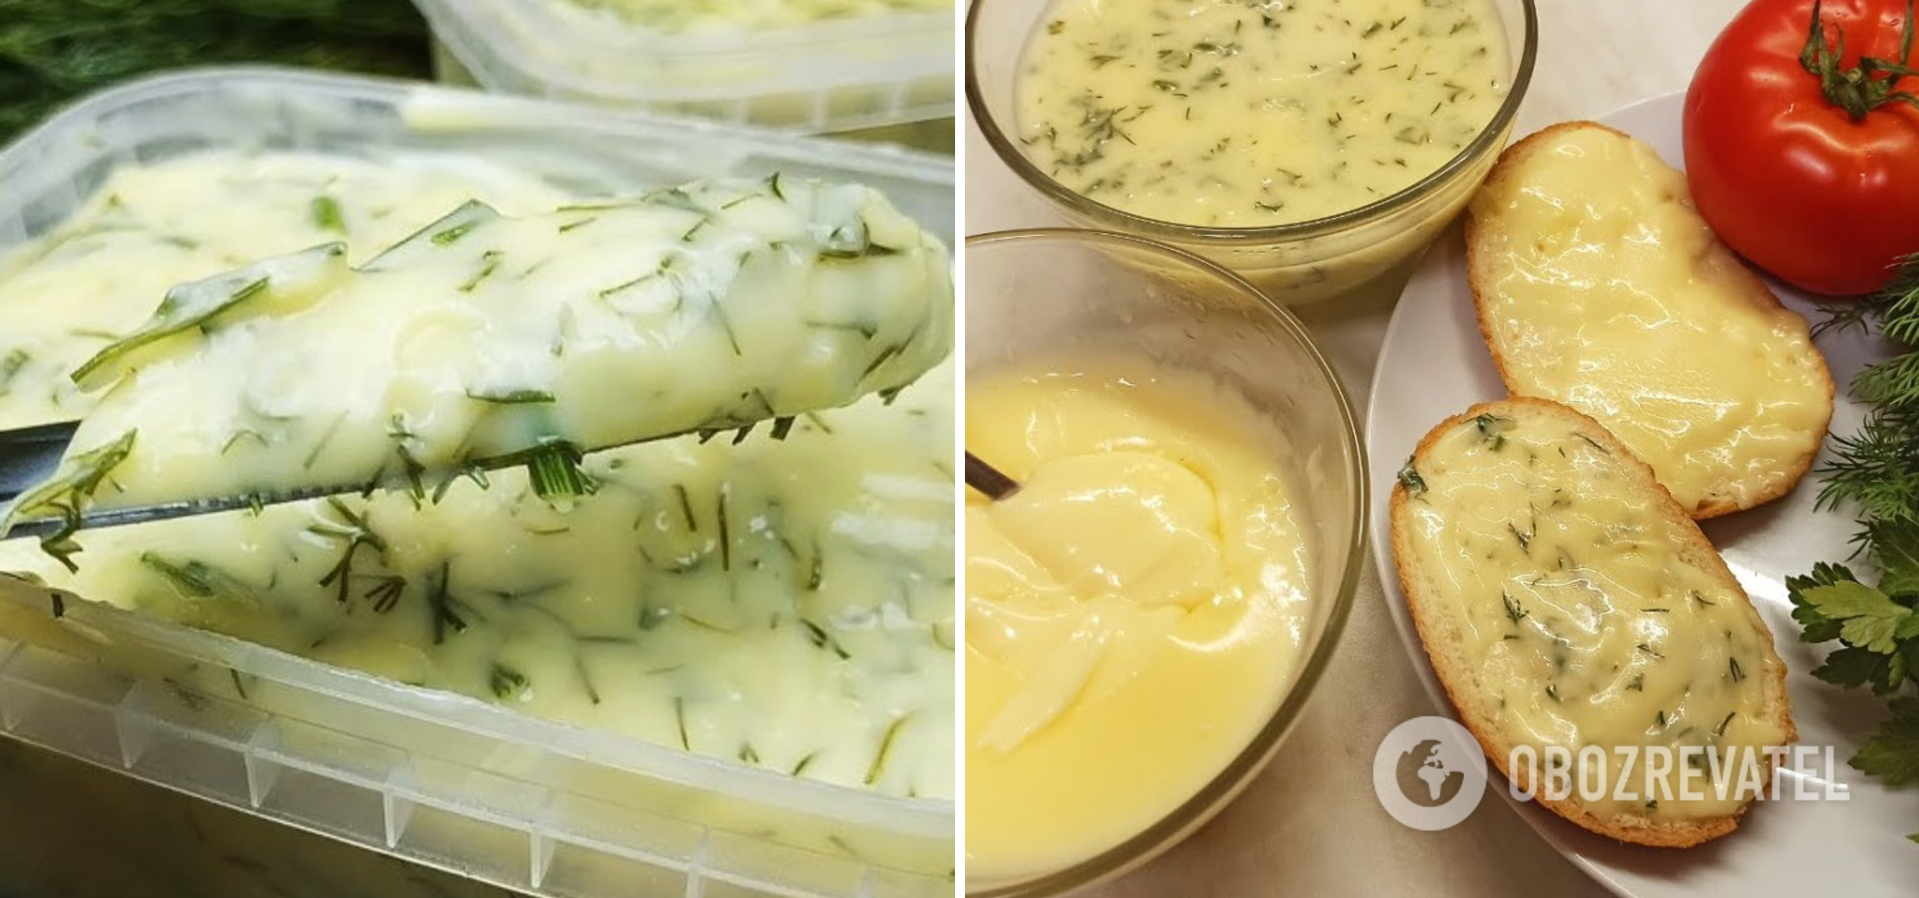 Processed cheese with herbs